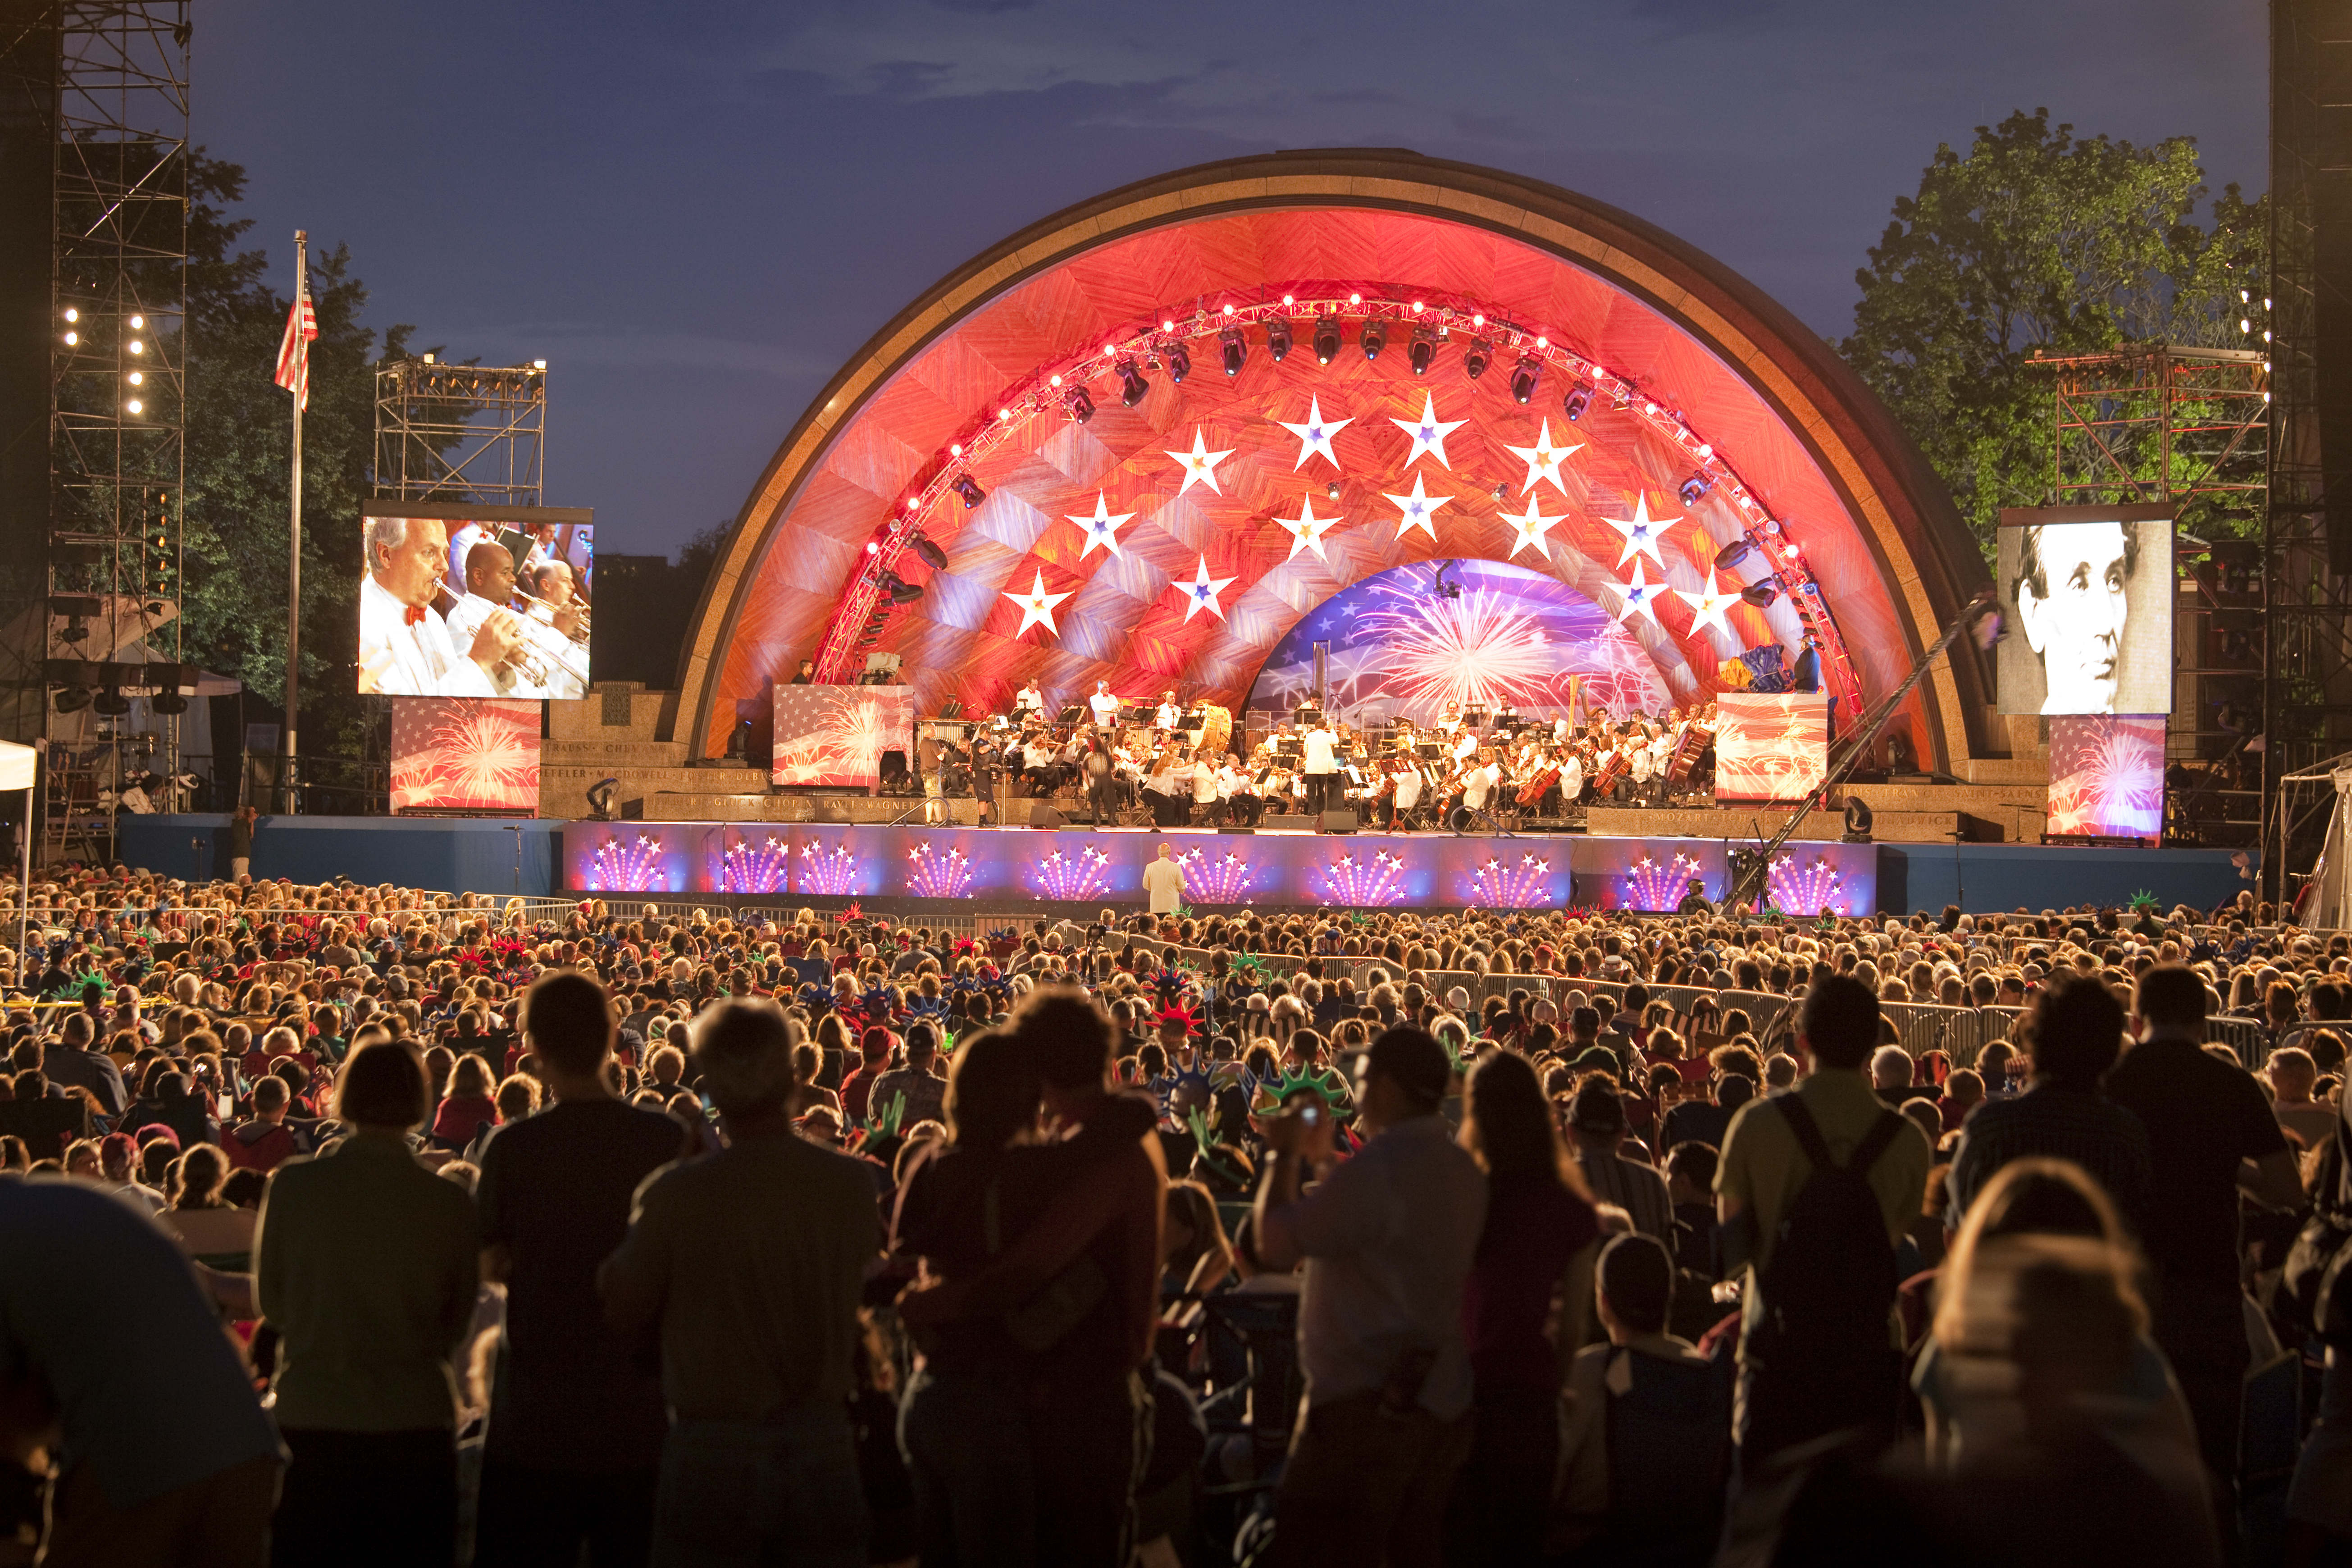 Hatch Memorial Shell during July 3rd and 4th Boston Pops concert.